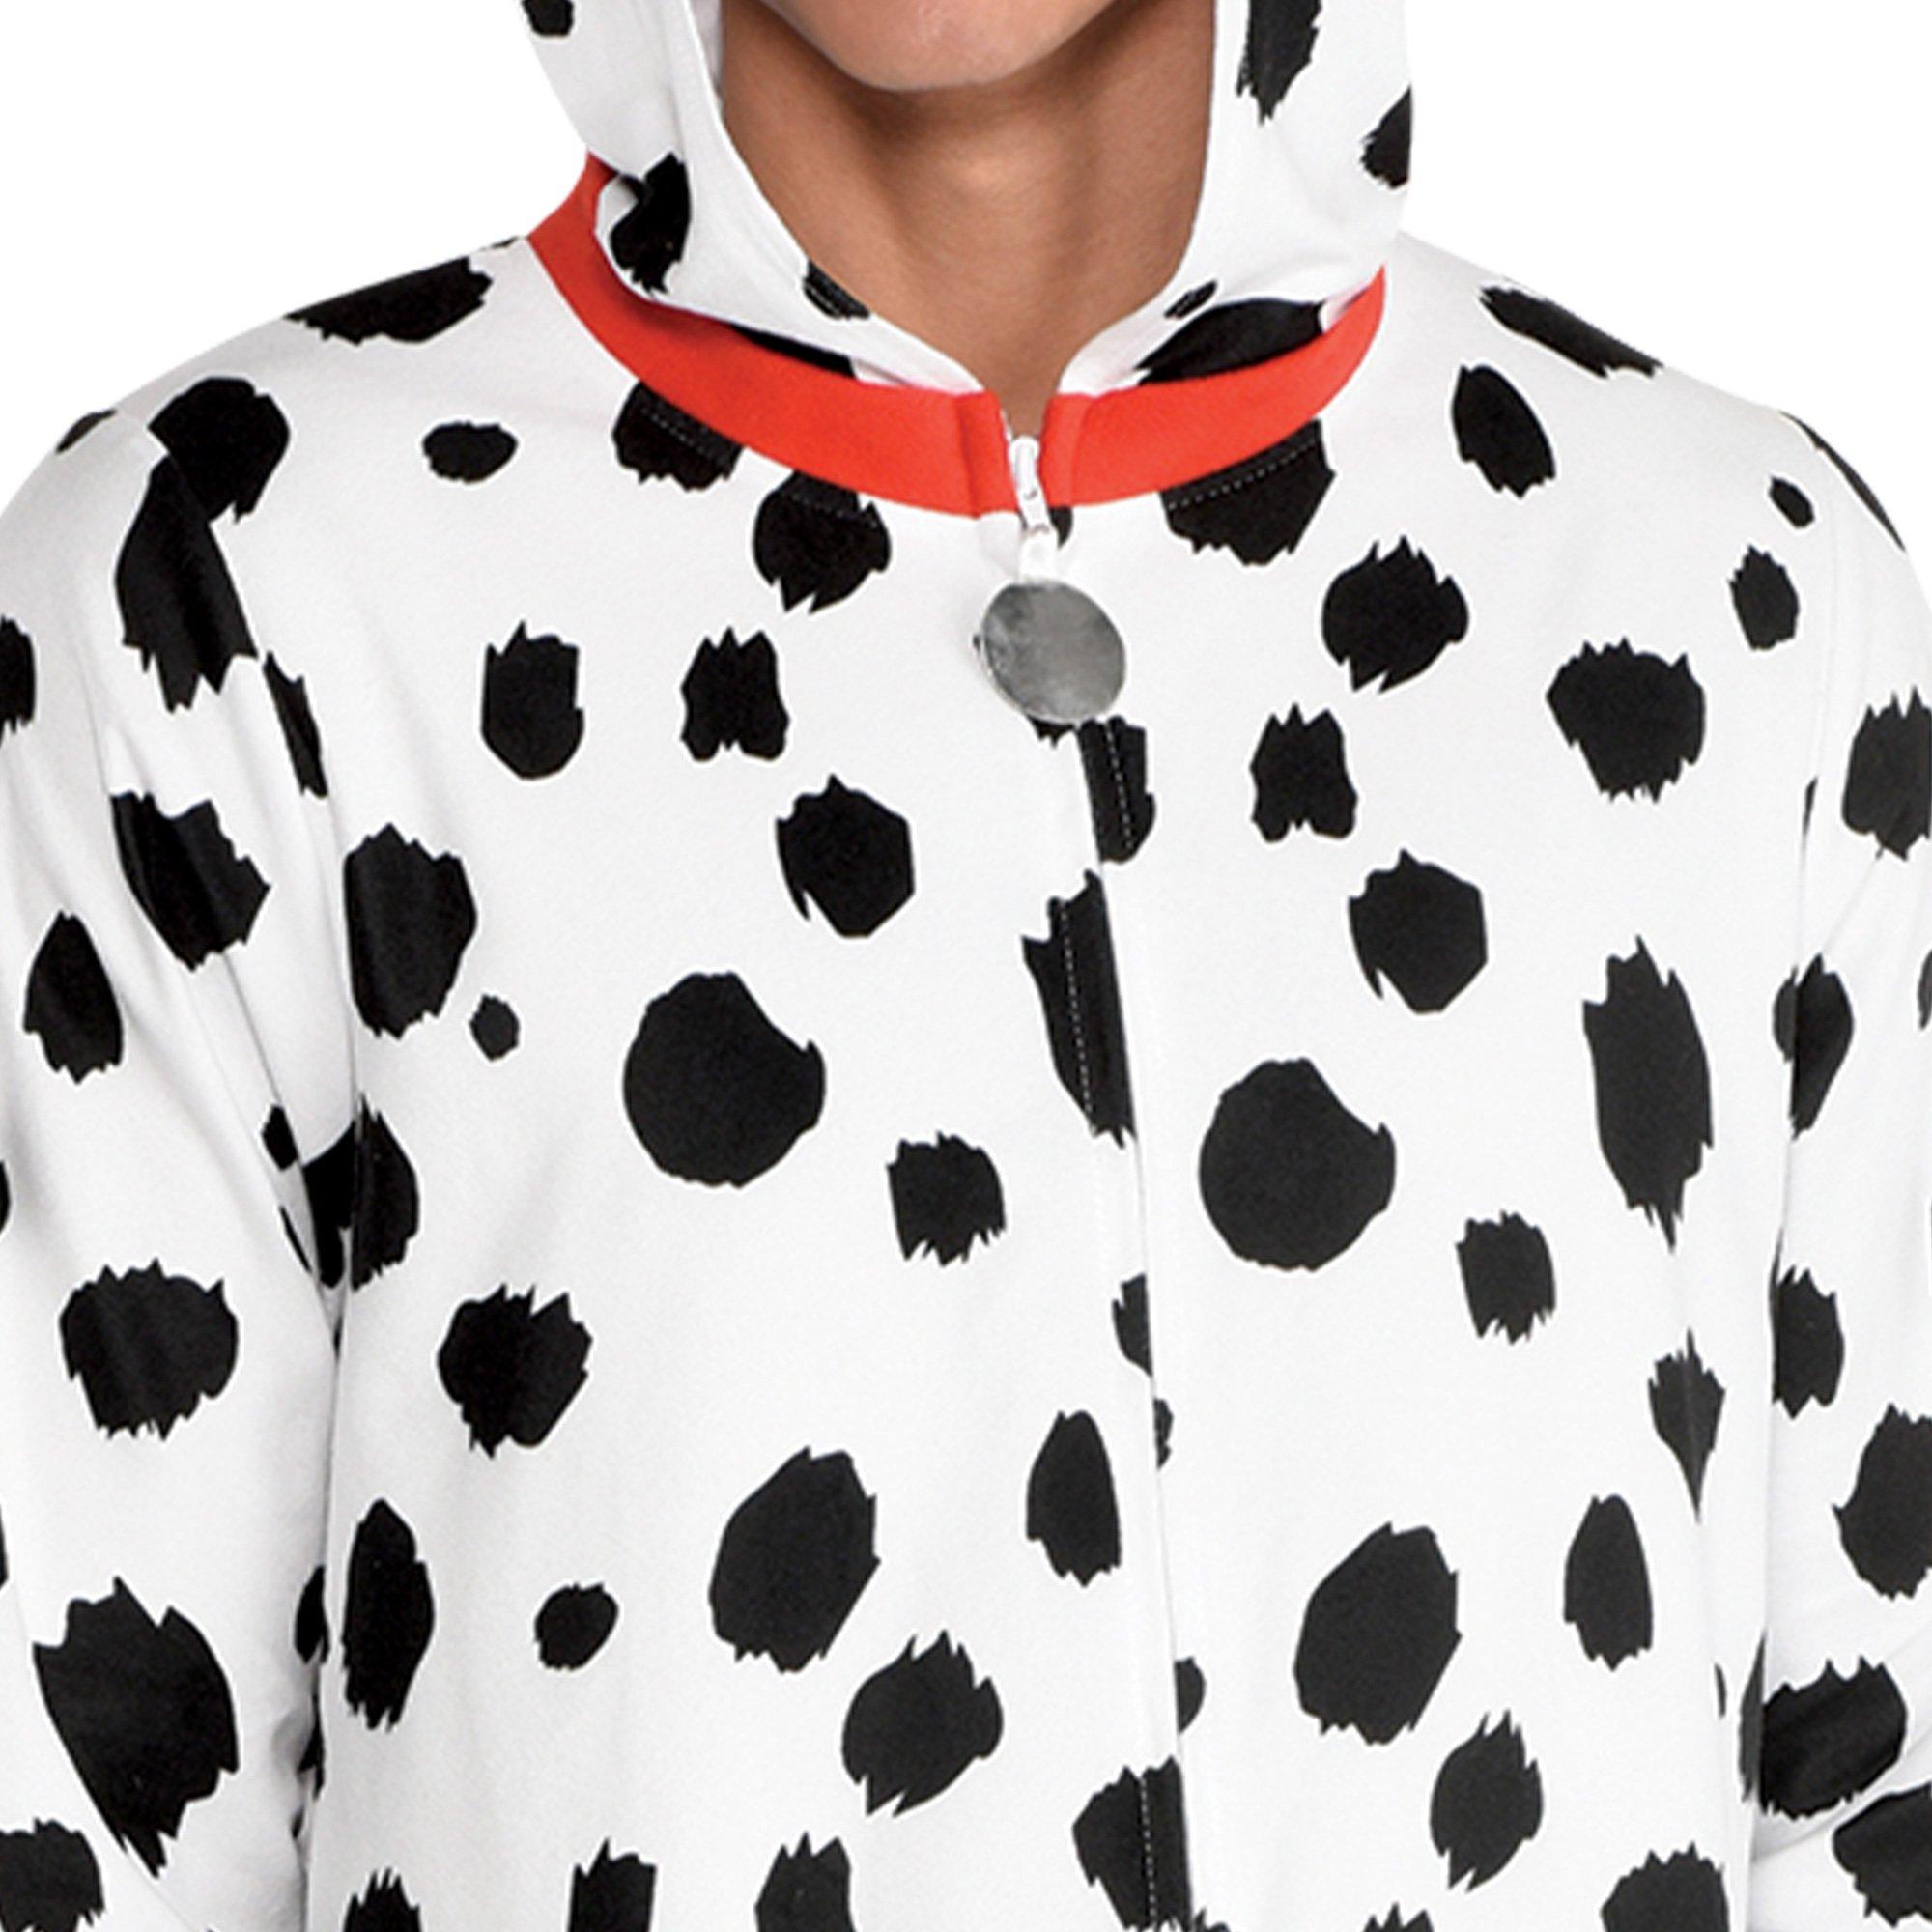 Adult Dalmatian Dog One Piece Zipster Costume